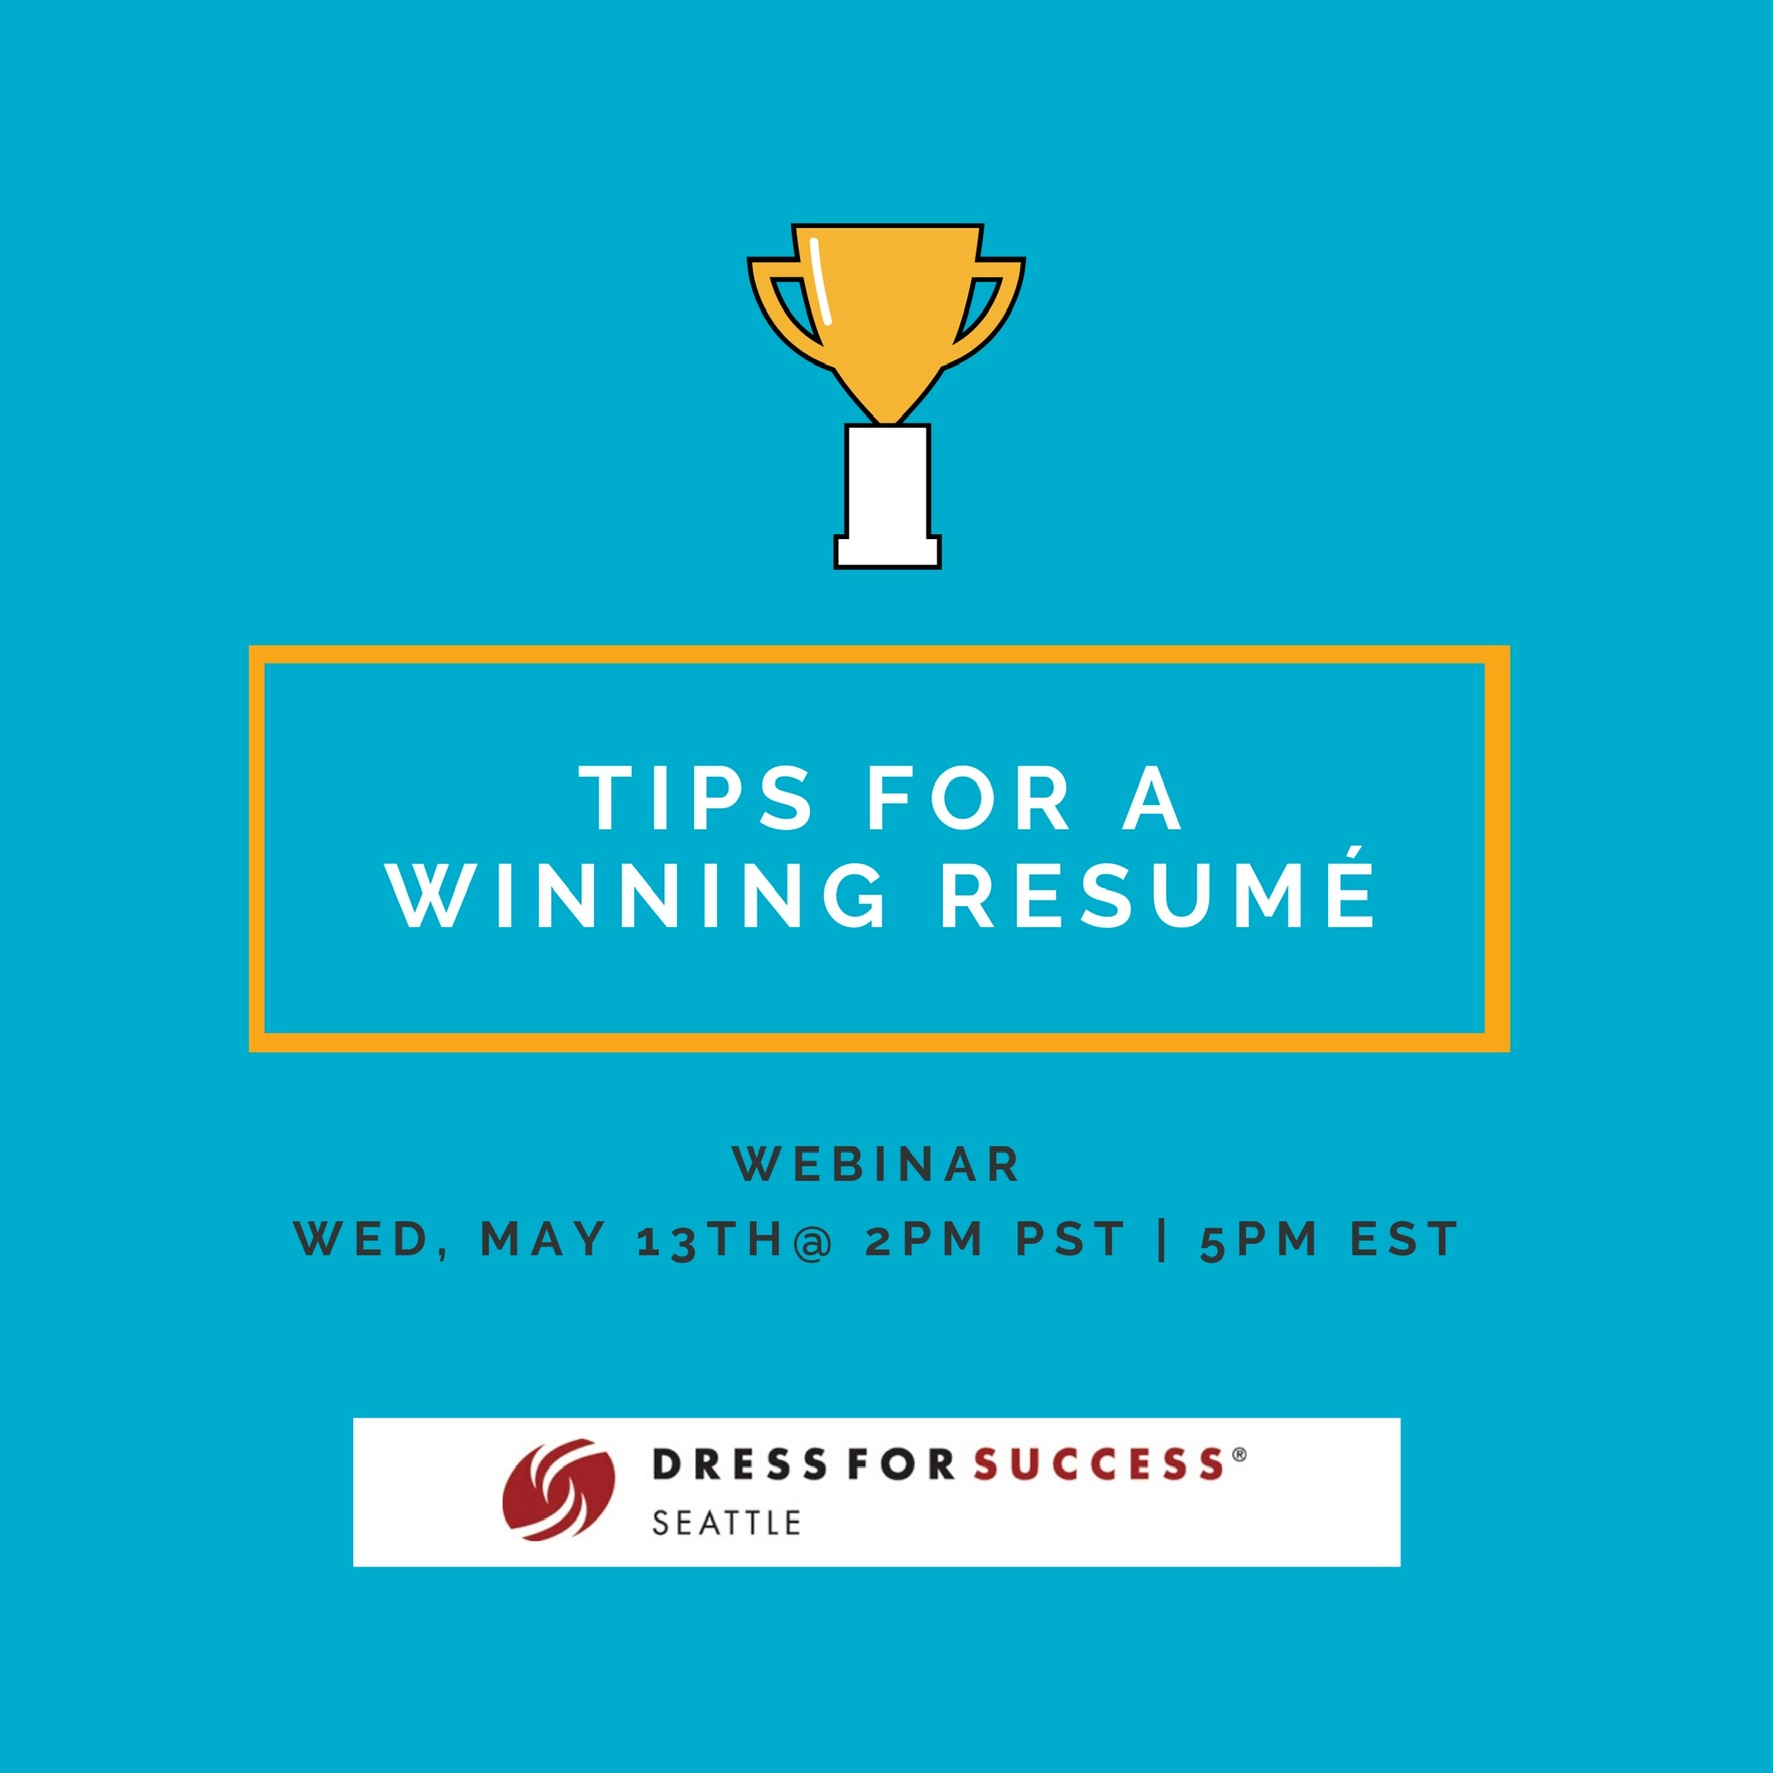 Graphic for tips for a winning resume on May 13, 2020 at 2 pm Pacific time.